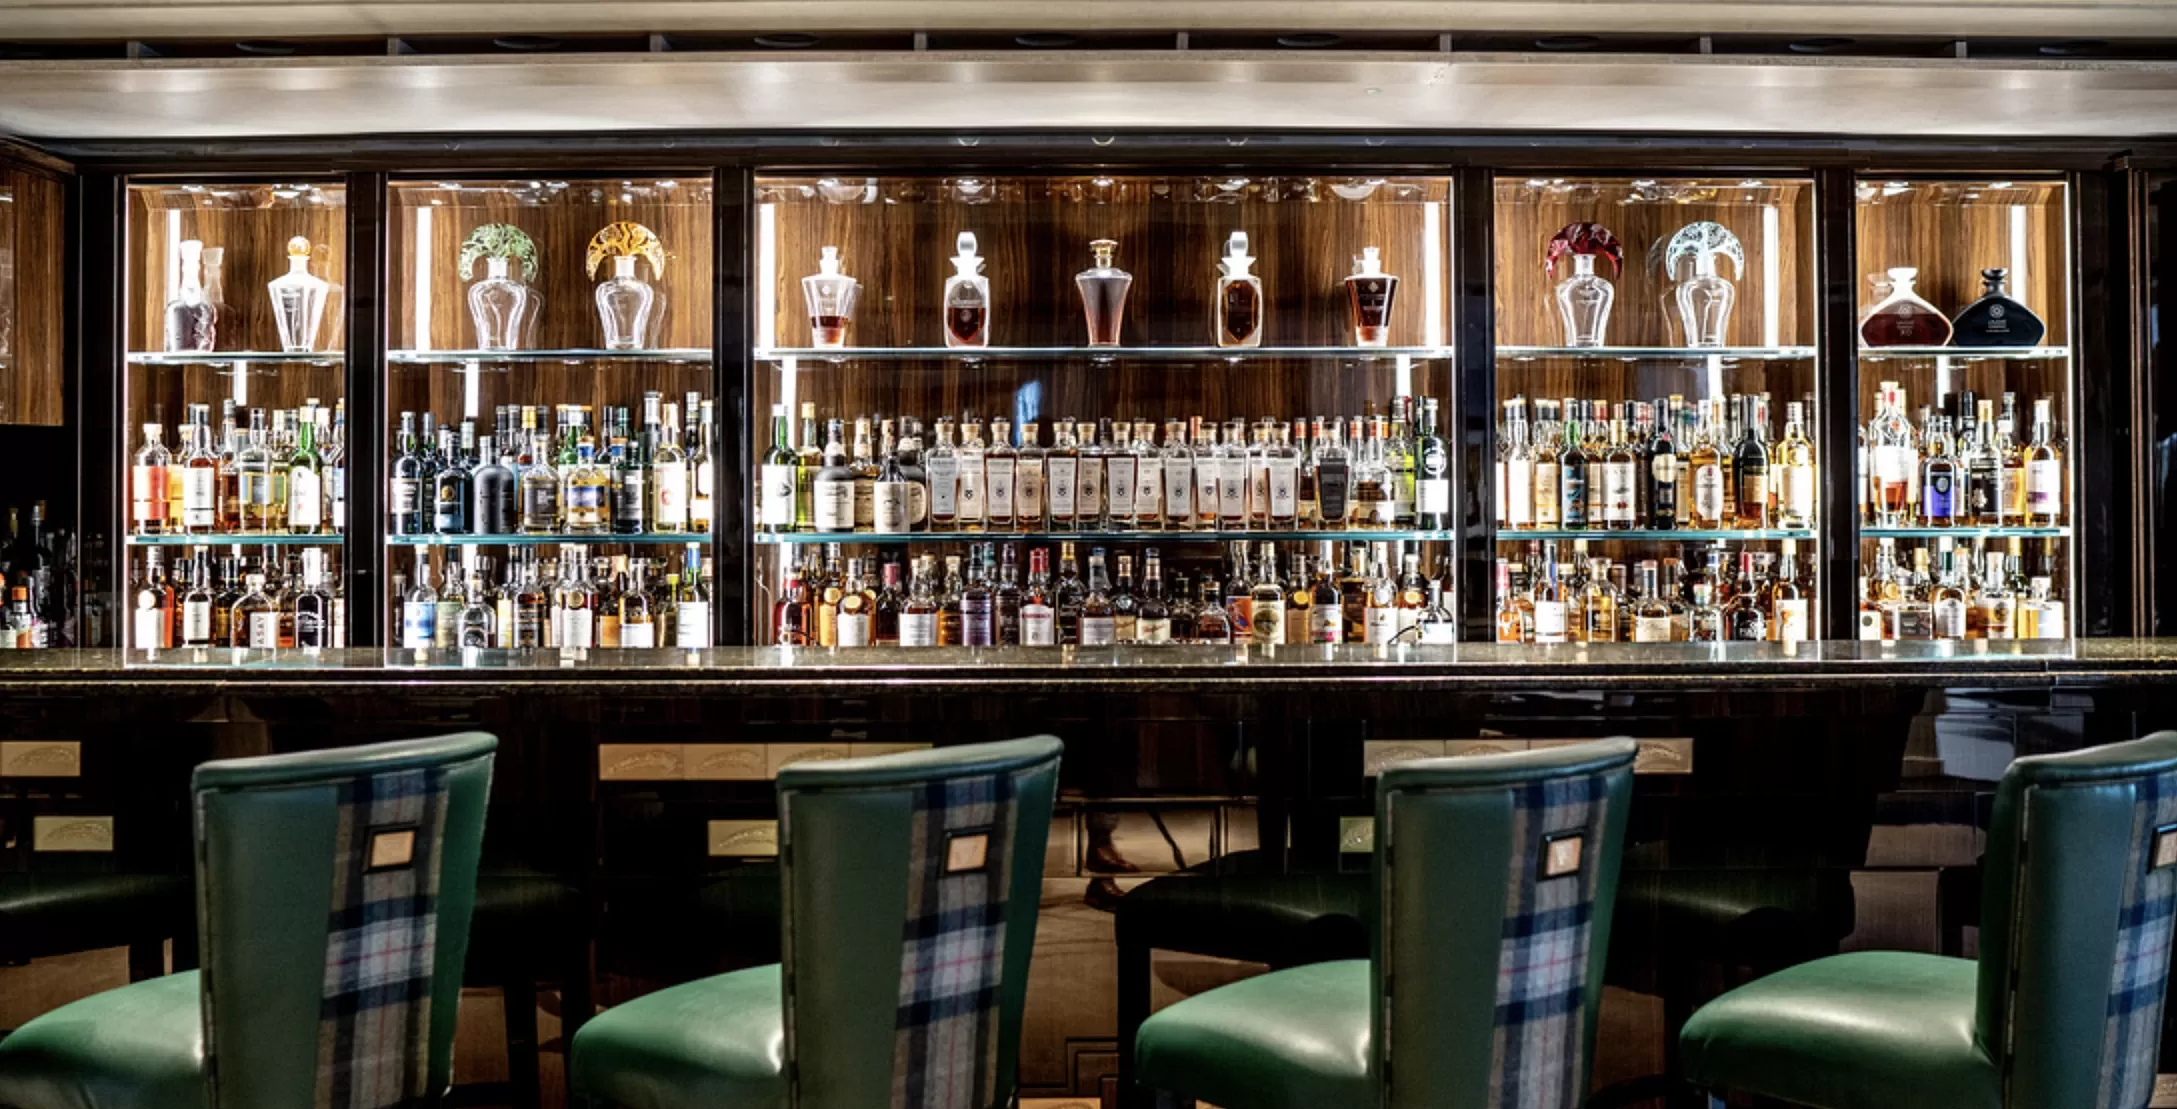 Luxury bar interior with tartan leather bar chairs in Scotland